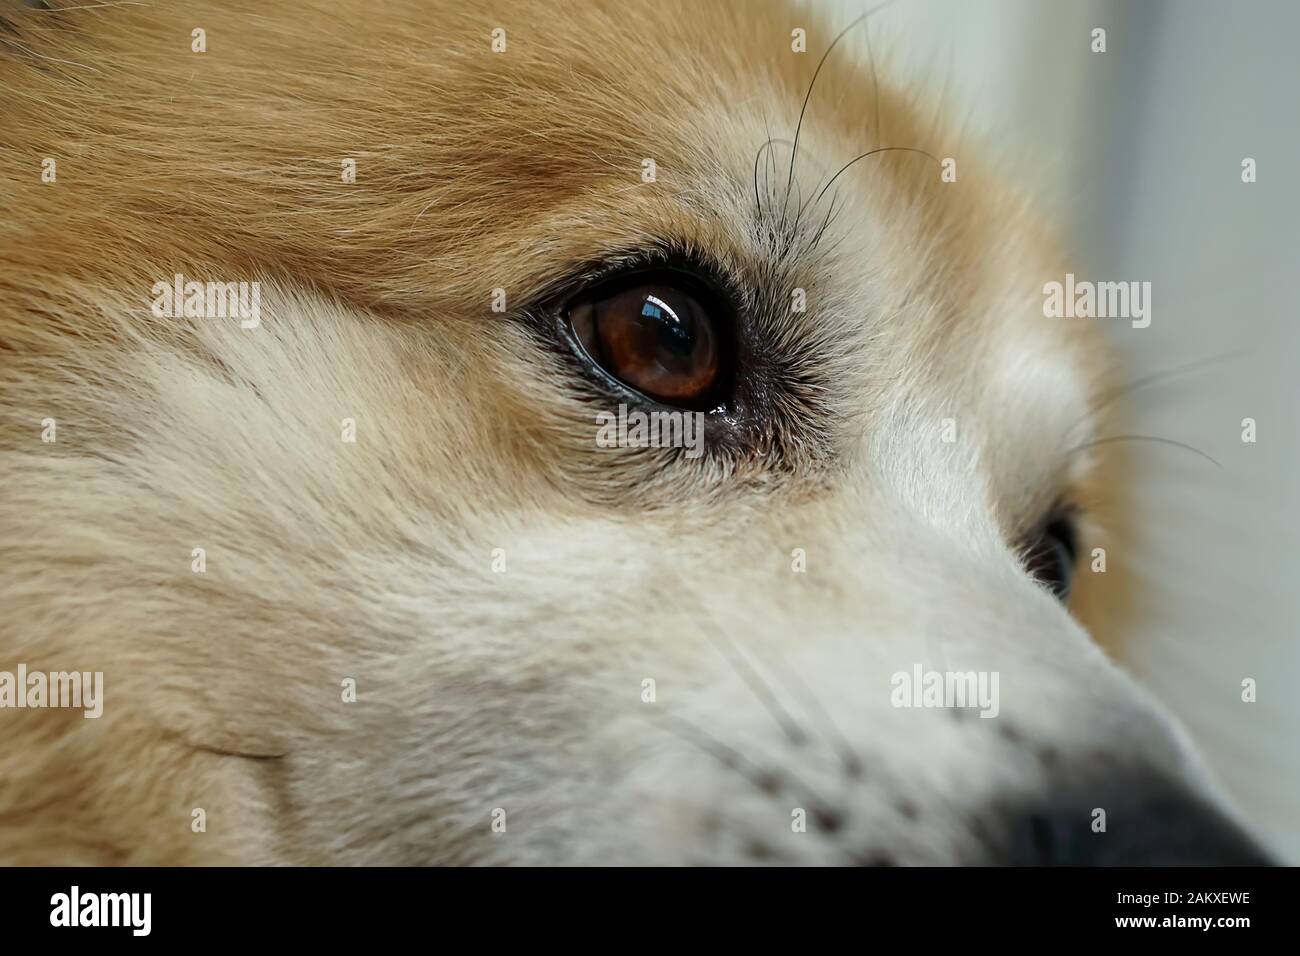 Head and eyes of dogs Its fur is brown and white. It is absent-minded Stock  Photo - Alamy